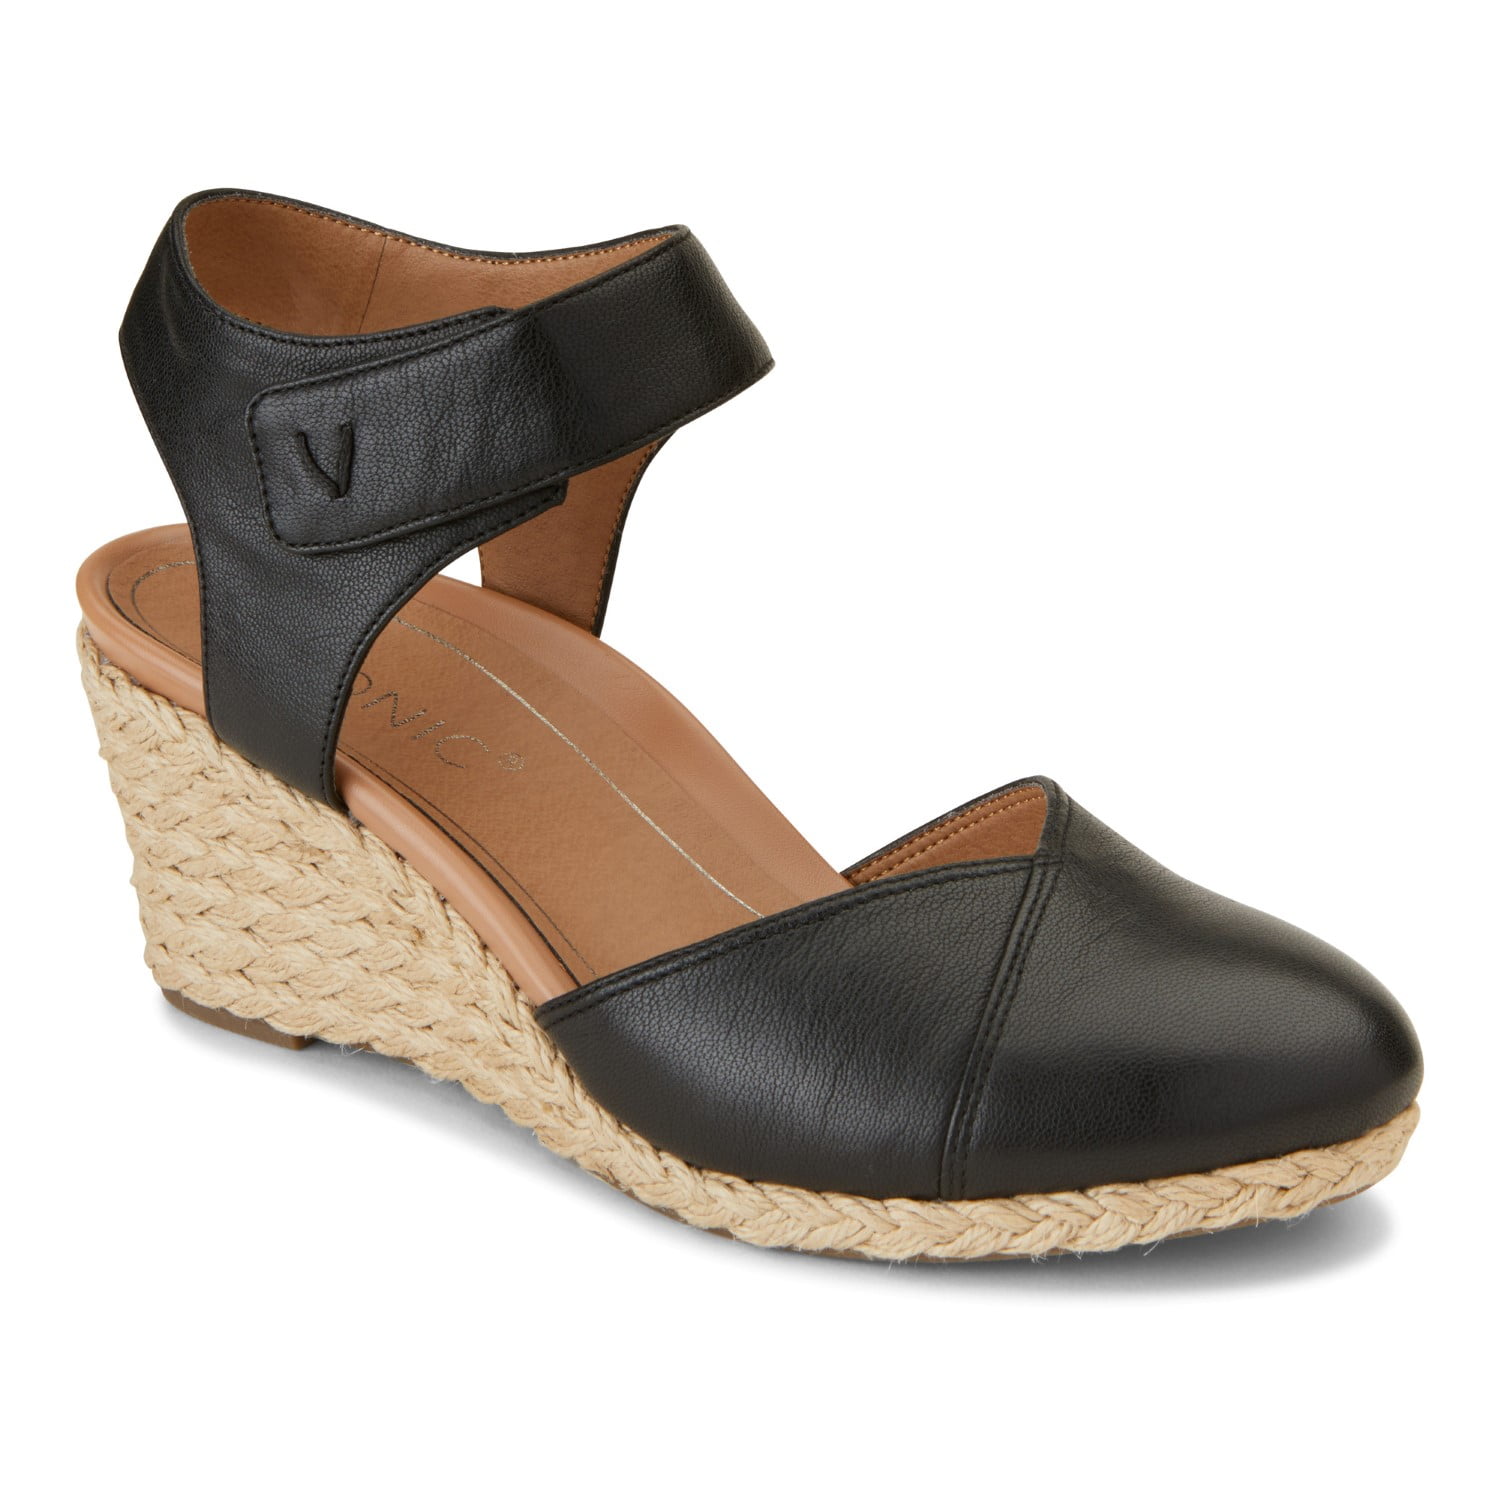 comfortable wedges closed toe